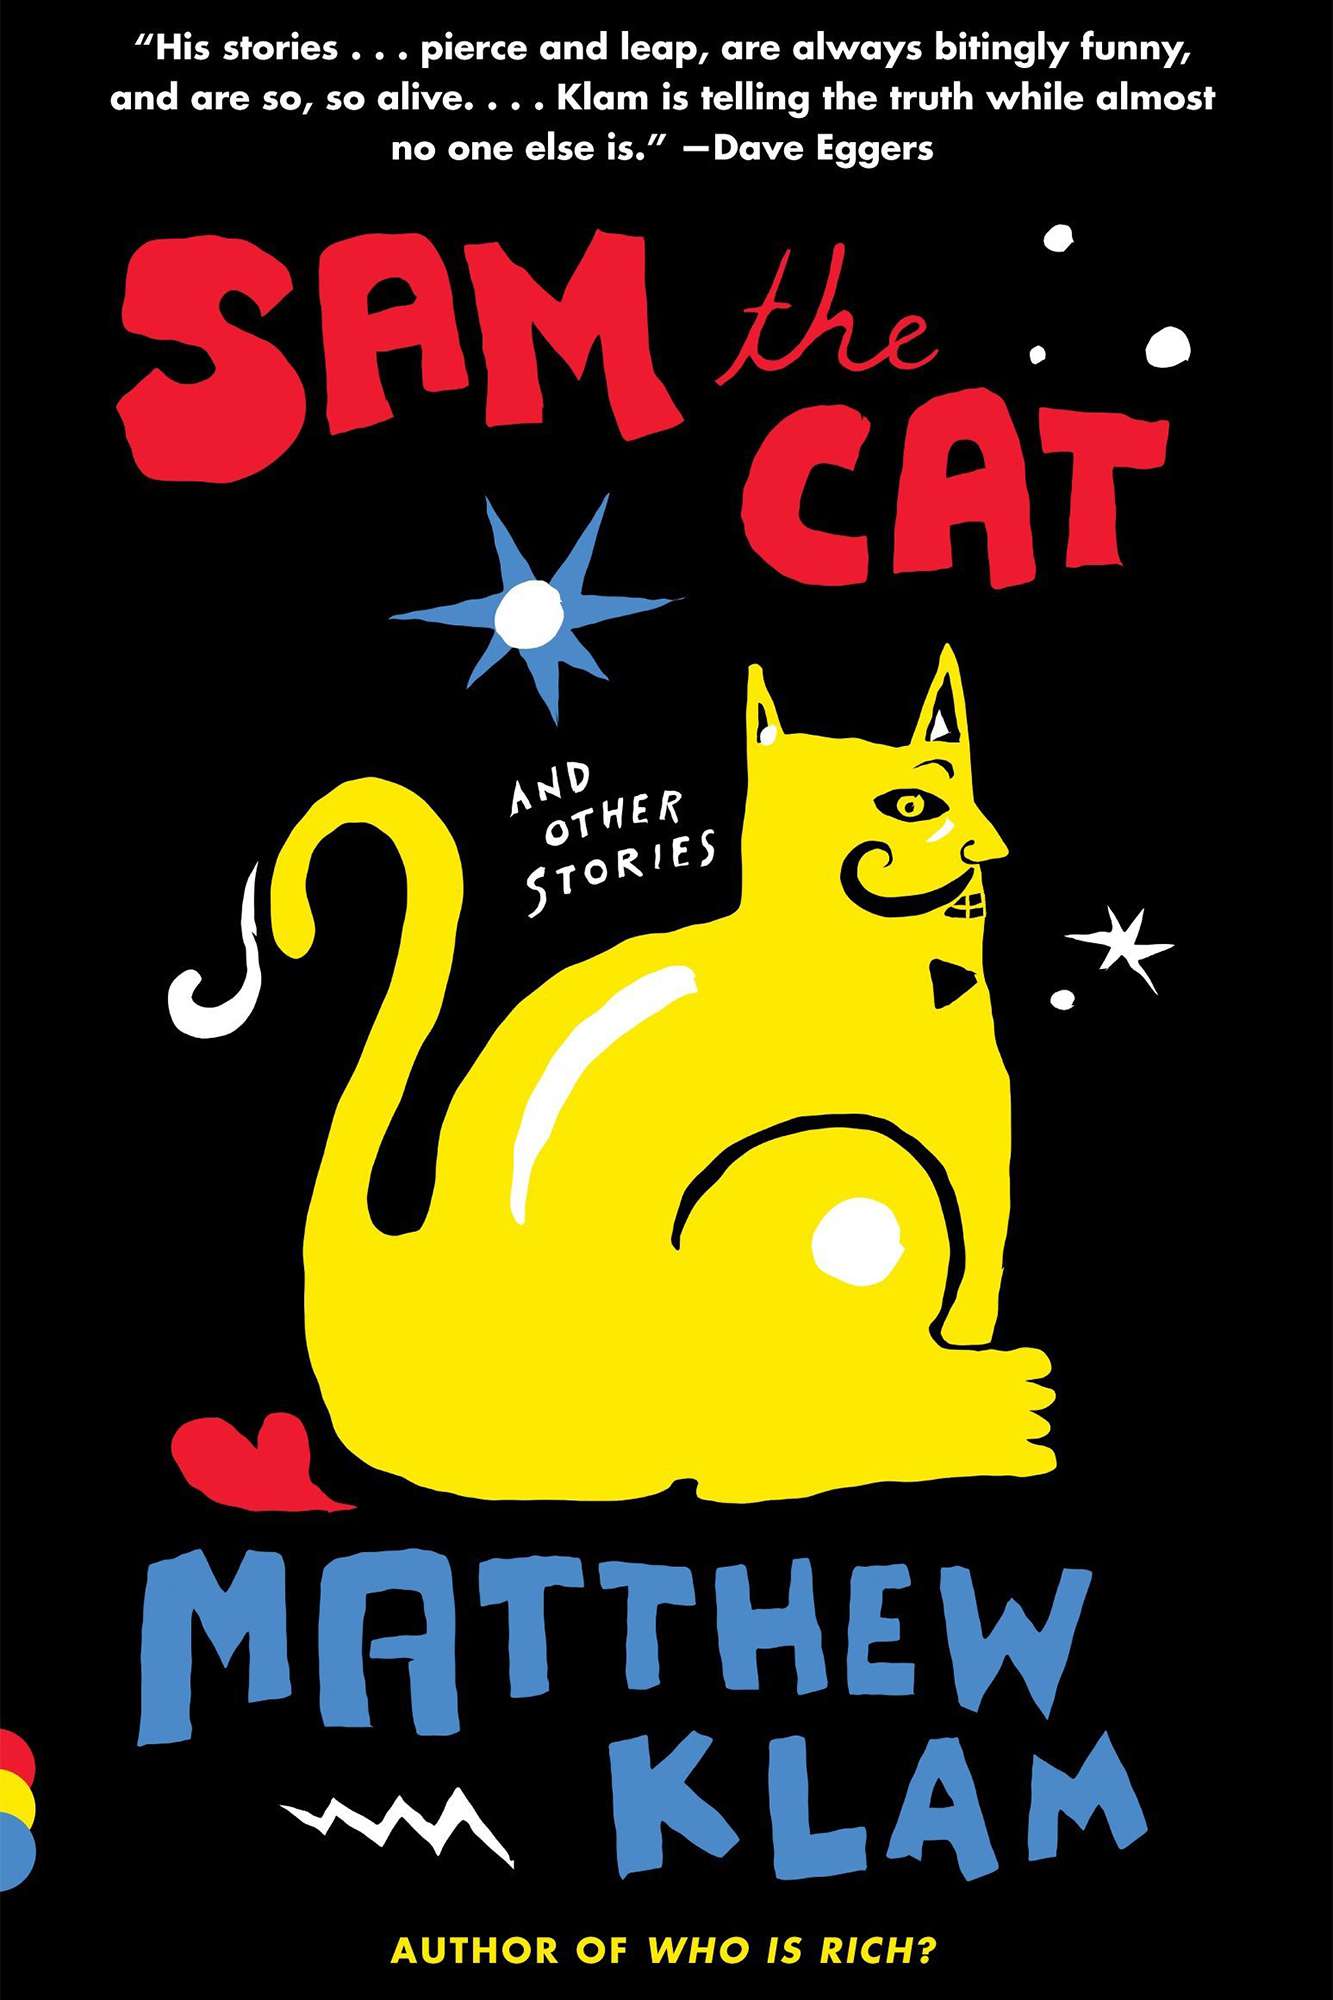 Sam the Cat: and Other Stories Paperback – May 29, 2001 by Matthew Klam